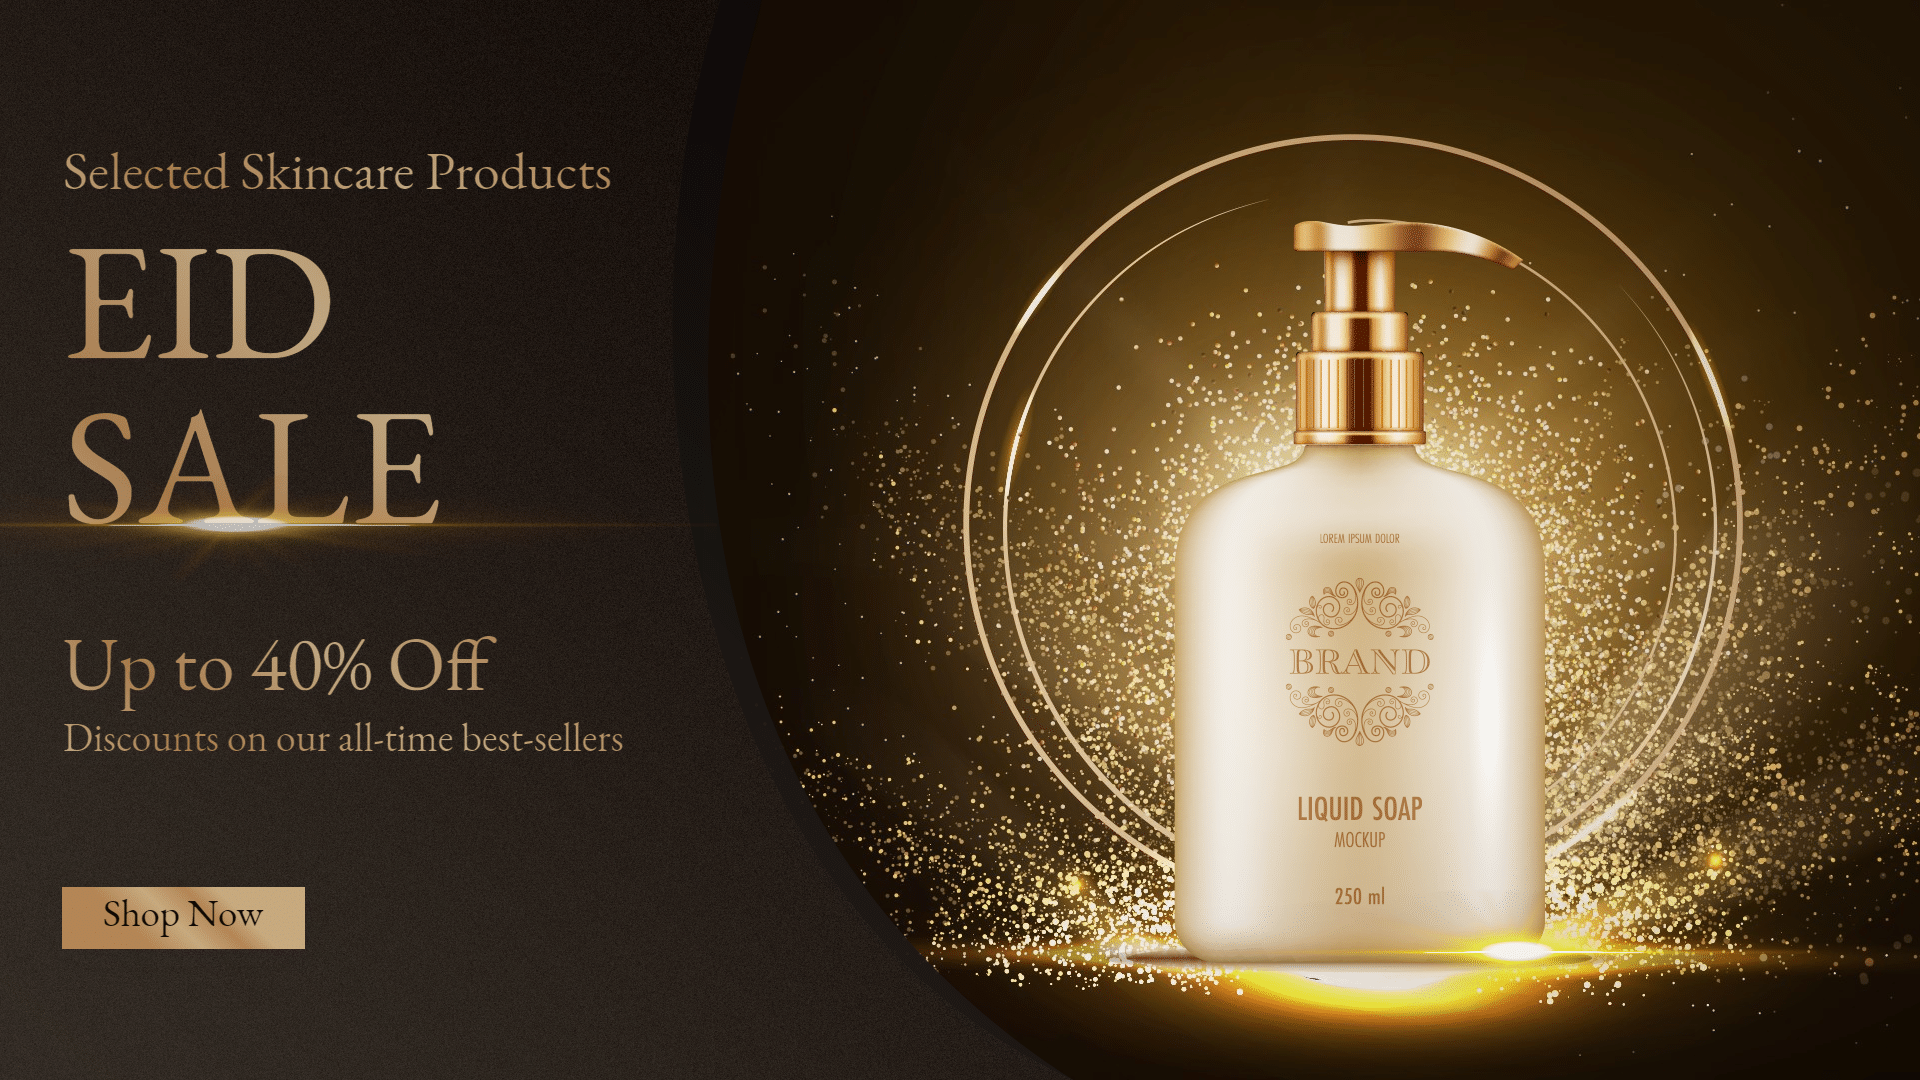 Skincare products eid sale ecommerce banner